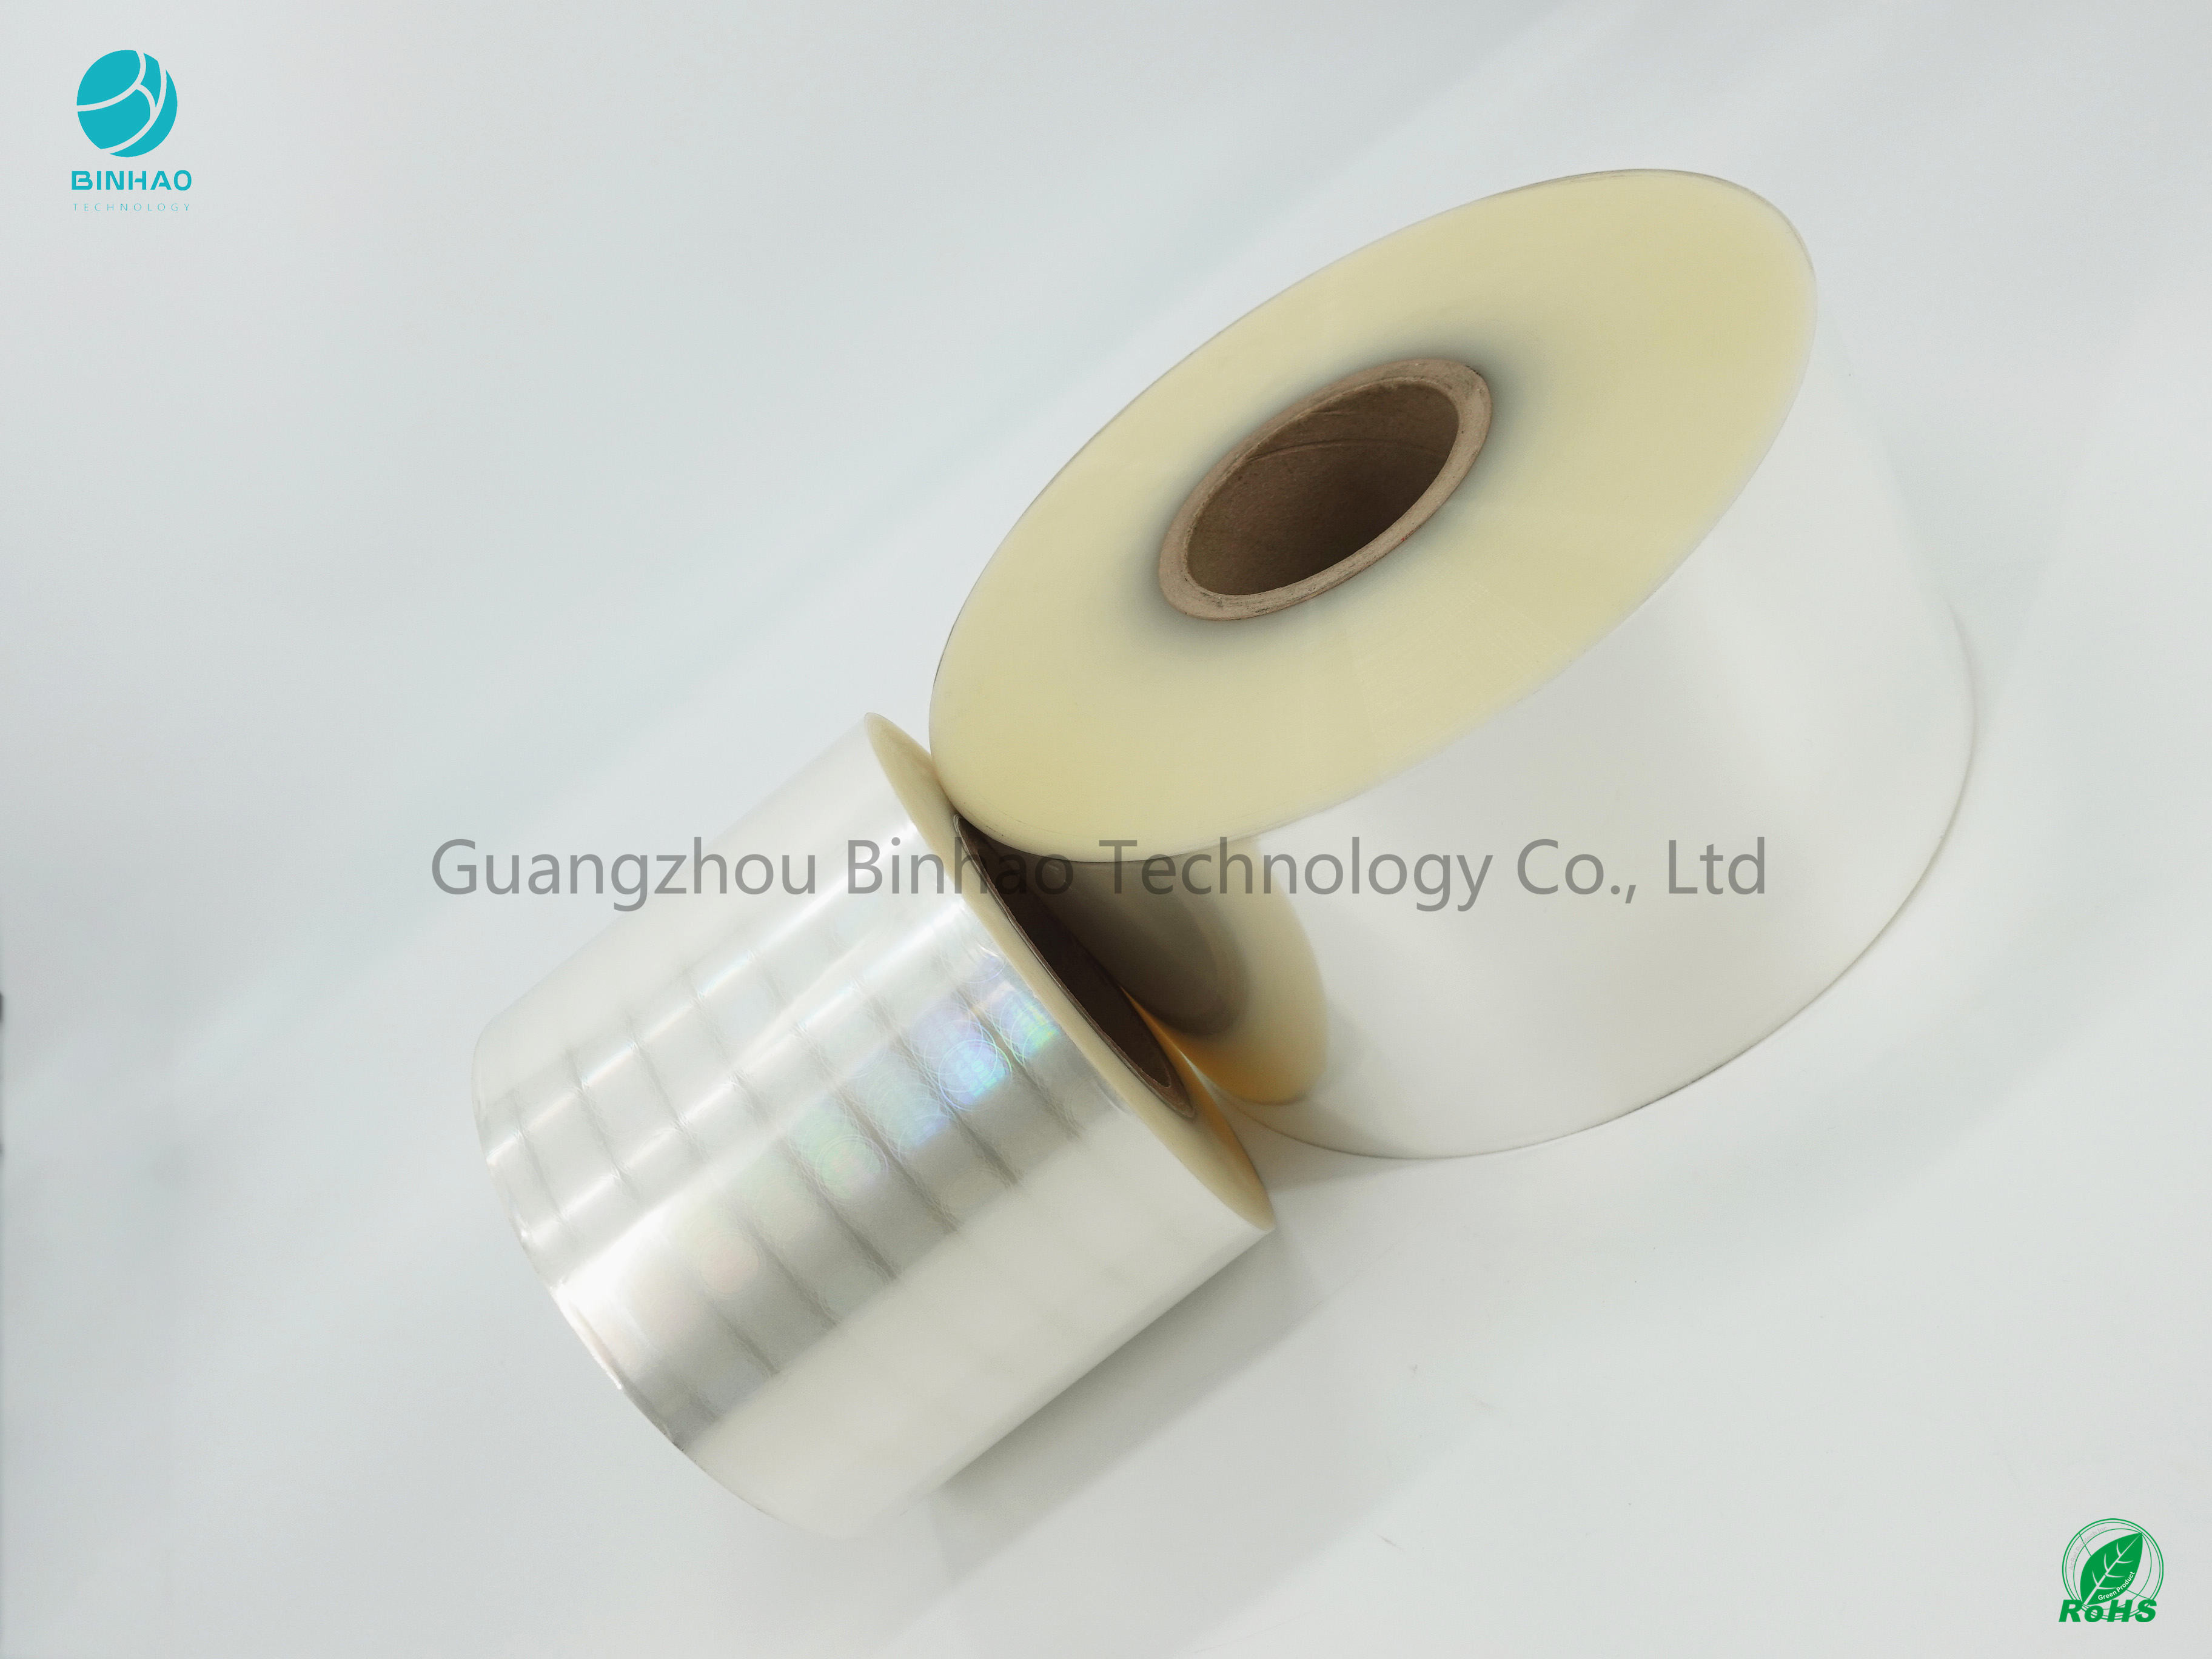 Cigarette BOPP Film Roll High Shrinkage Rate Use On High Speed Packing Machine